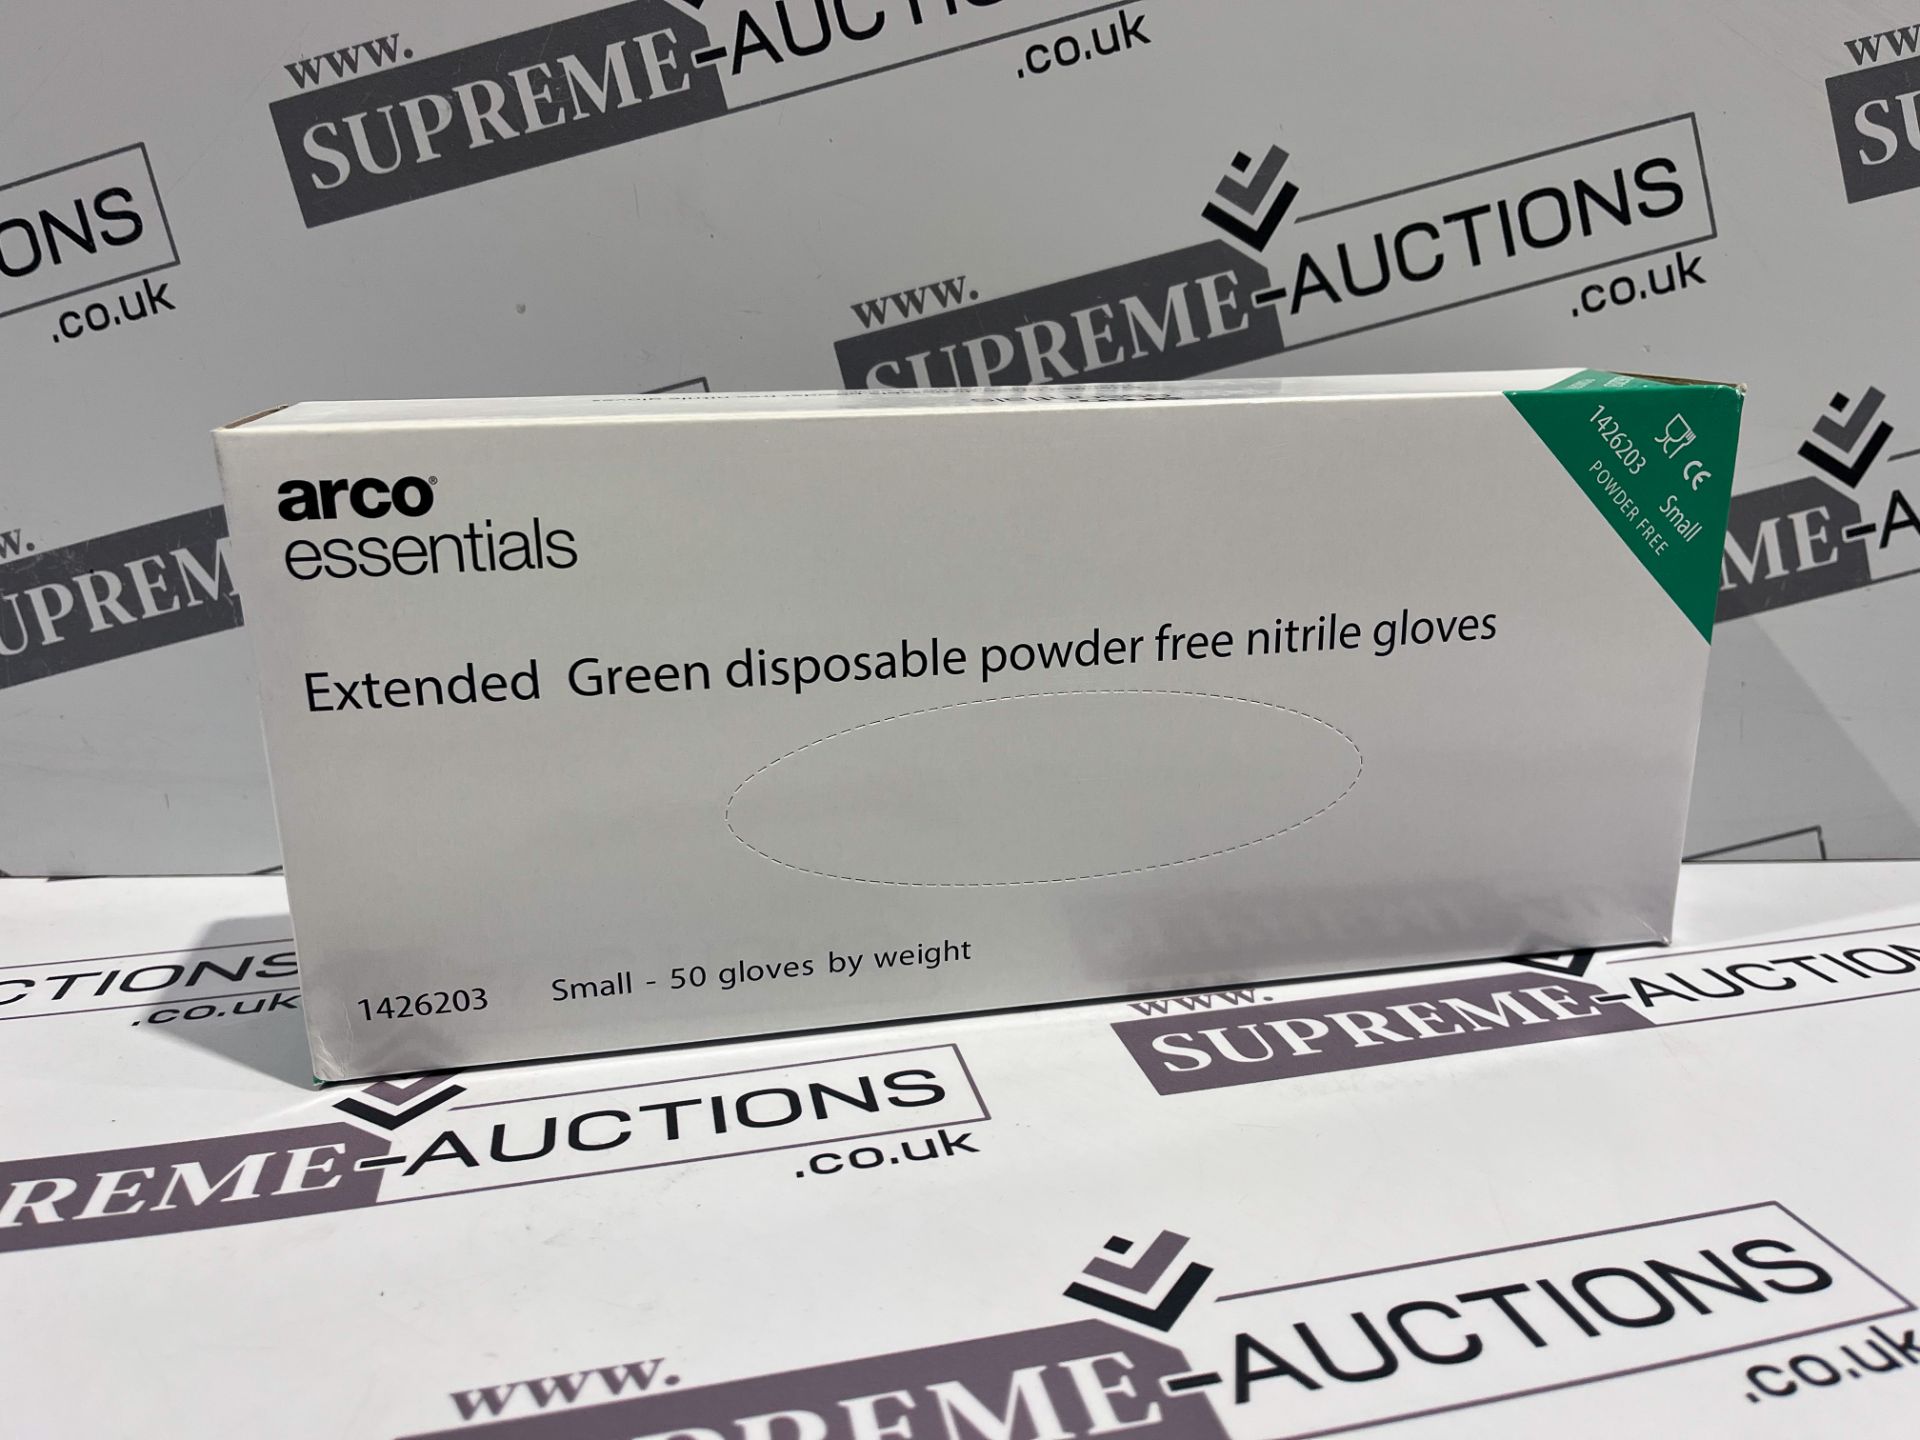 1000X BRAND NEW ARCO ESSENTIALS EXTENDED GREEN DISPOSABLE POWDER FREE NITRILE GLOVES SIZE SMALL S1-